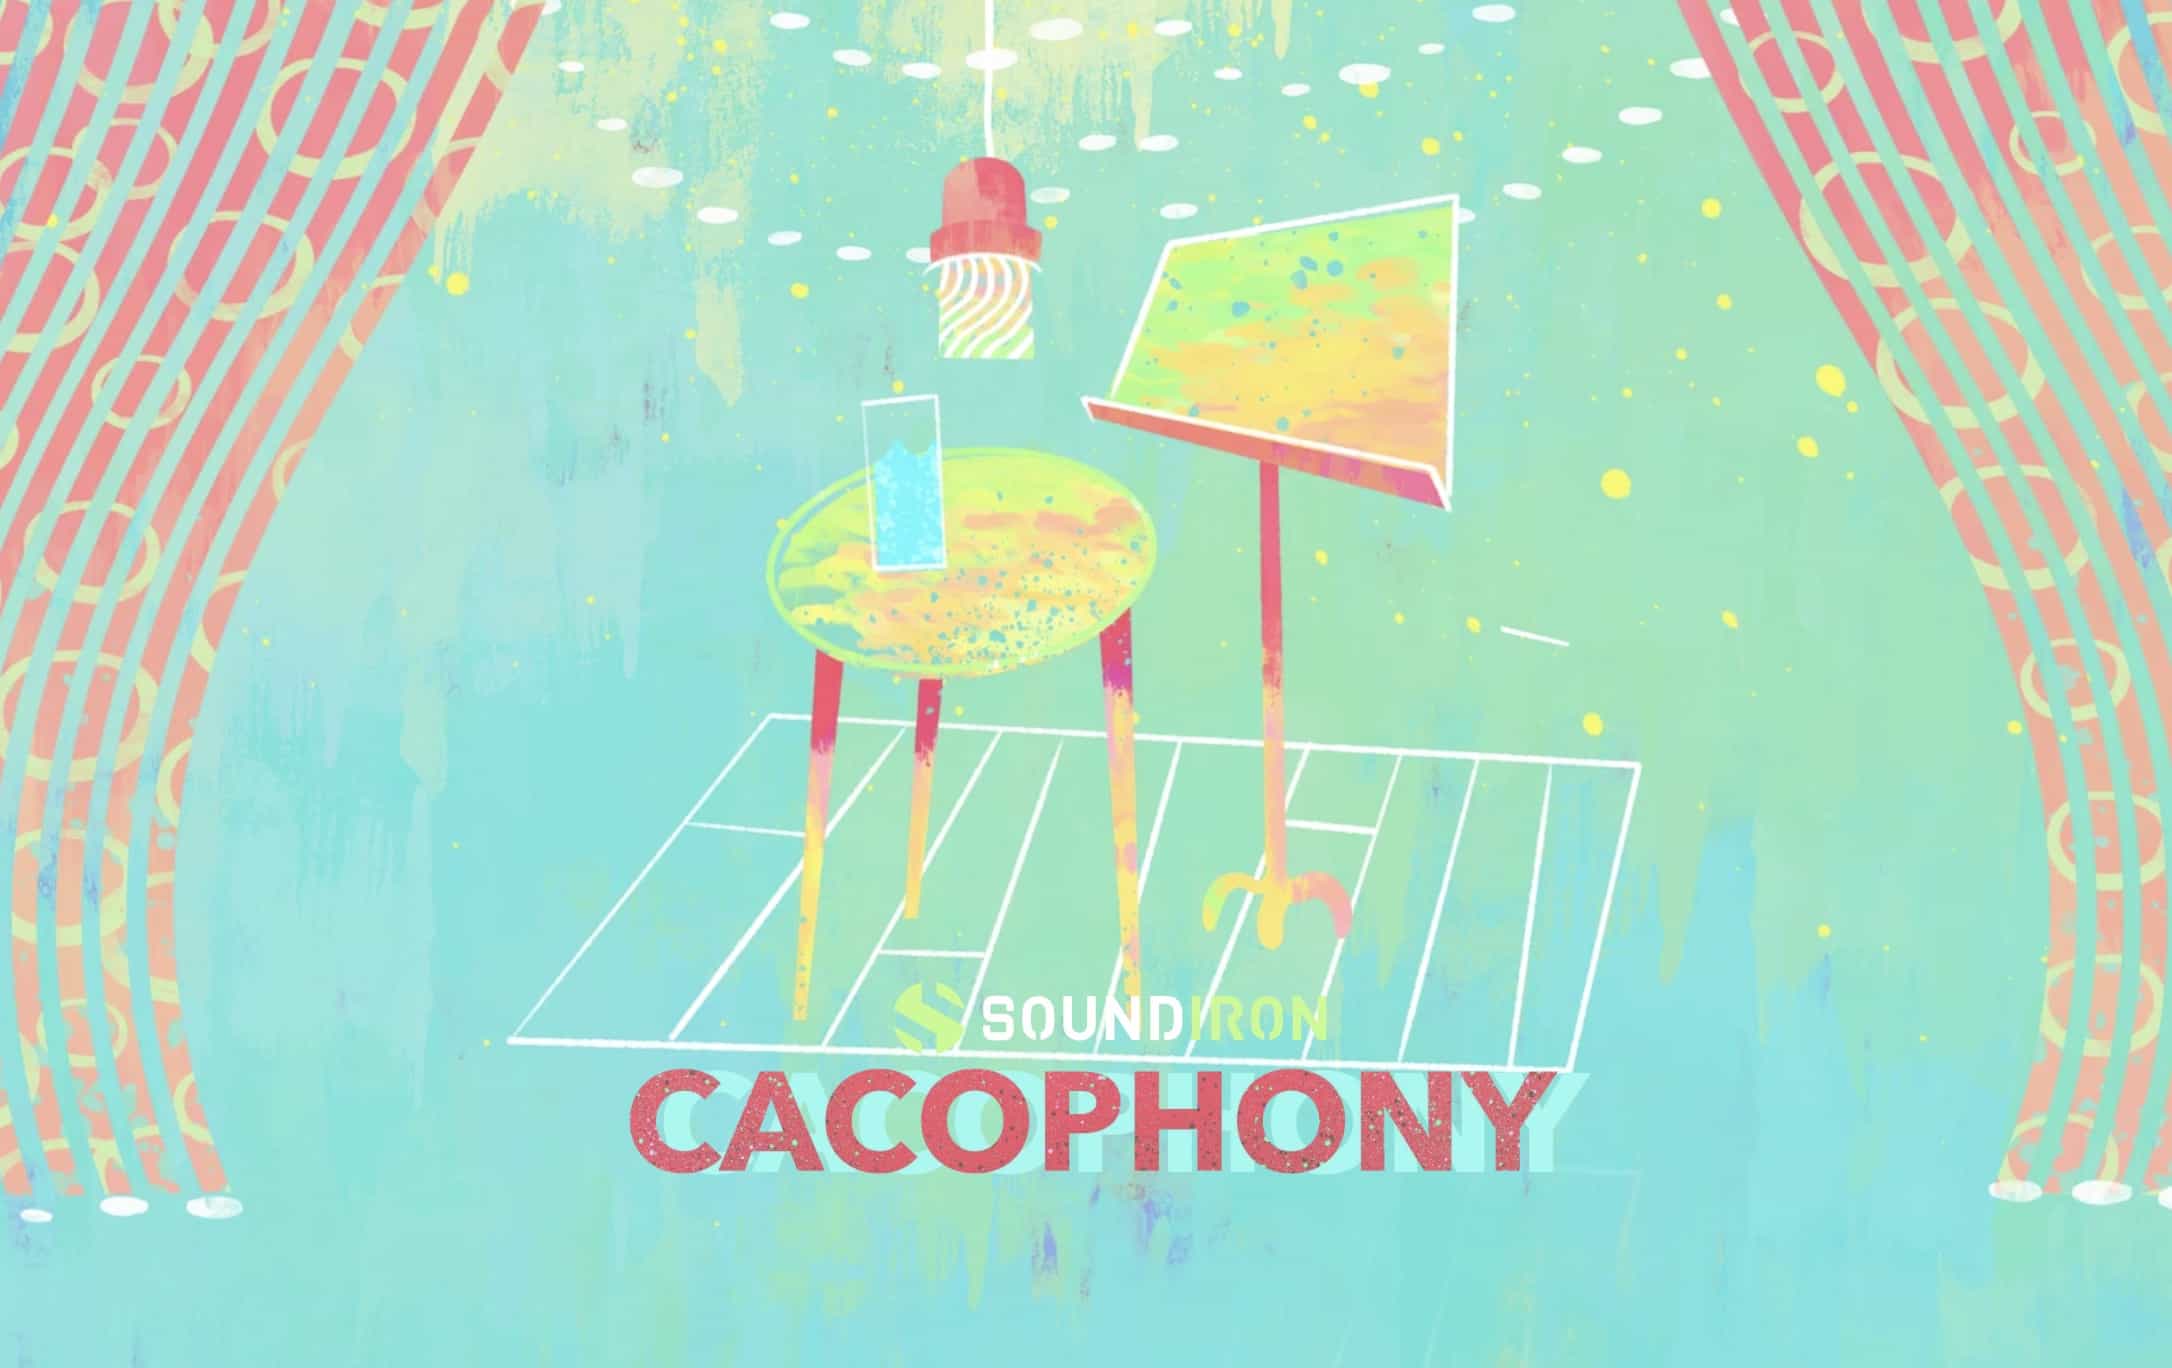 Cacophony The Beauty of Silence Chaos by Soundiron